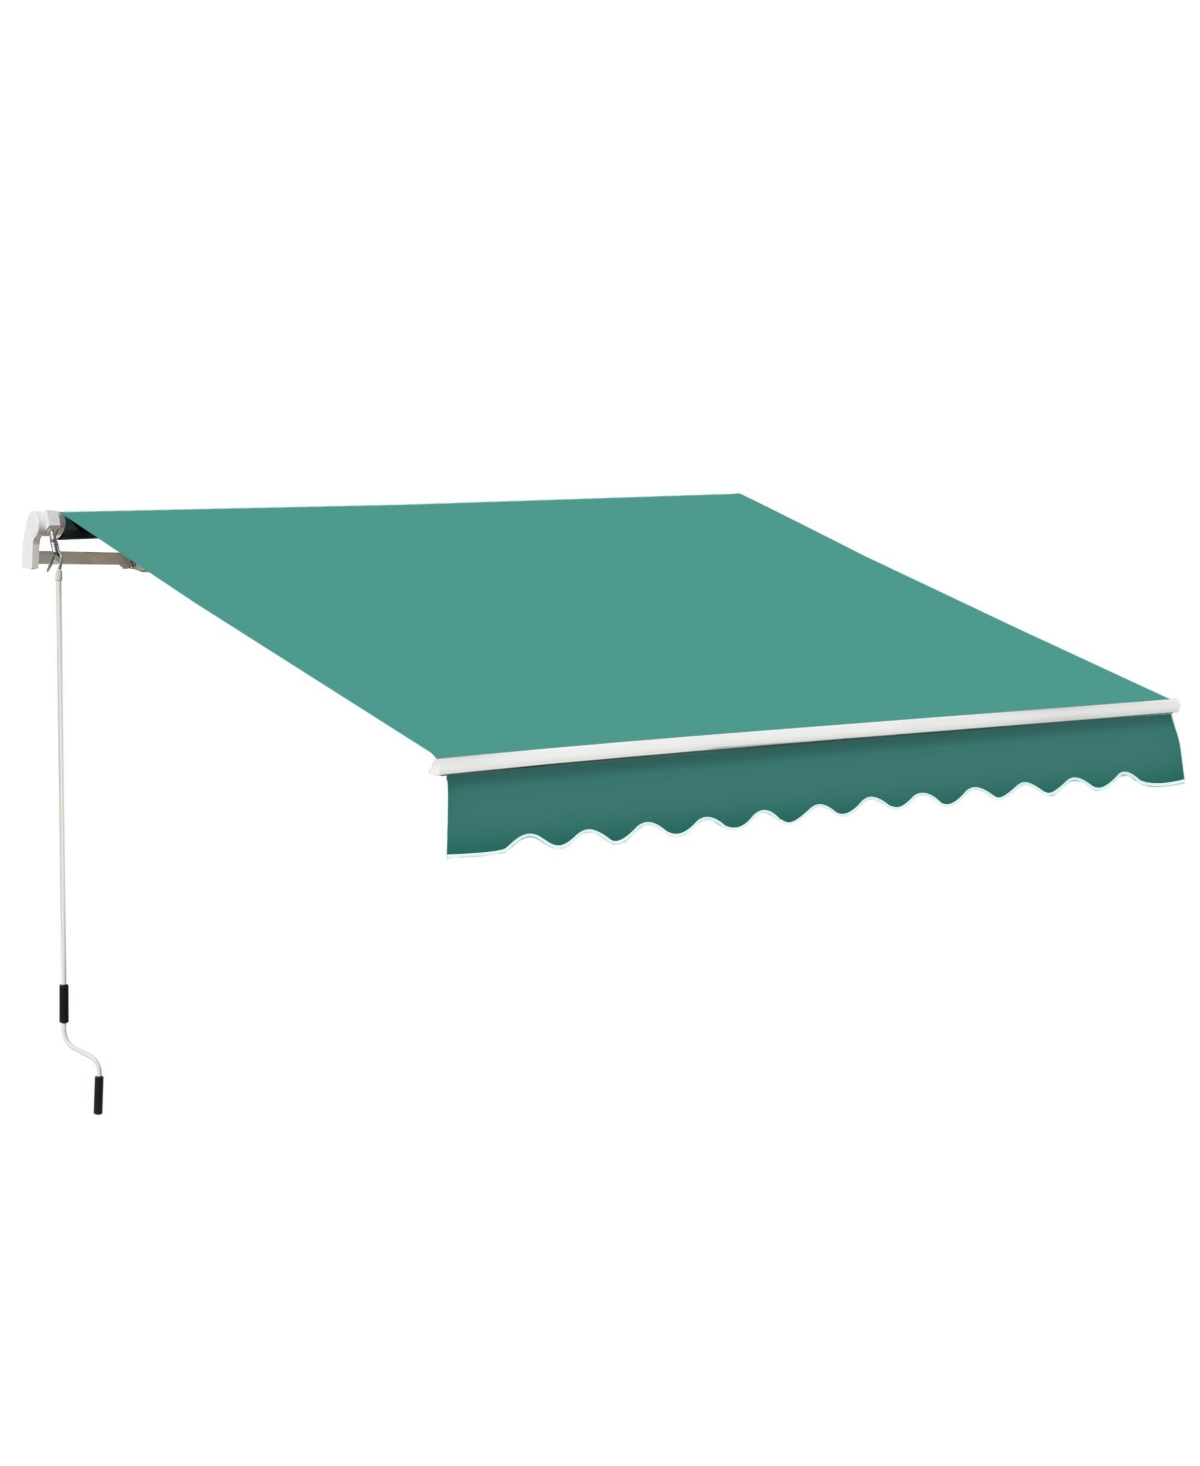 13' x 8' Retractable Awning, Patio Awnings, Sunshade Shelter with Manual Crank Handle, 280g/m&#xB2; Uv & Water-Resistant Fabric and Aluminum